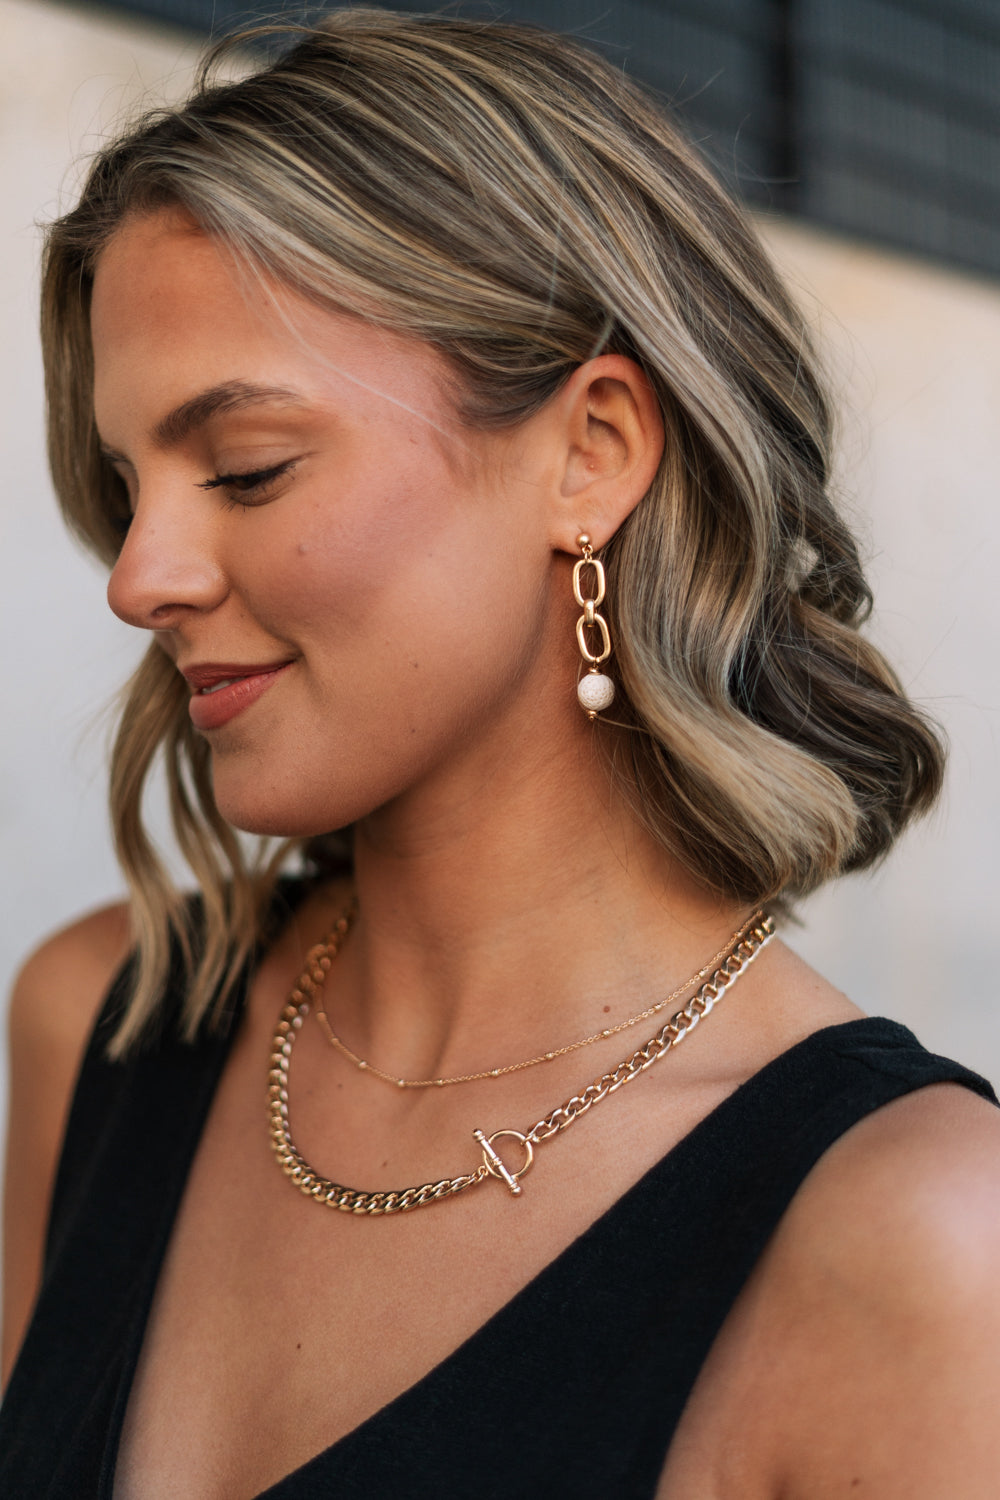 Side view of female model wearing the Rhodes Gold & Cream Chain Dangle Earring which features gold chain link dangle earrings with cream textured beads